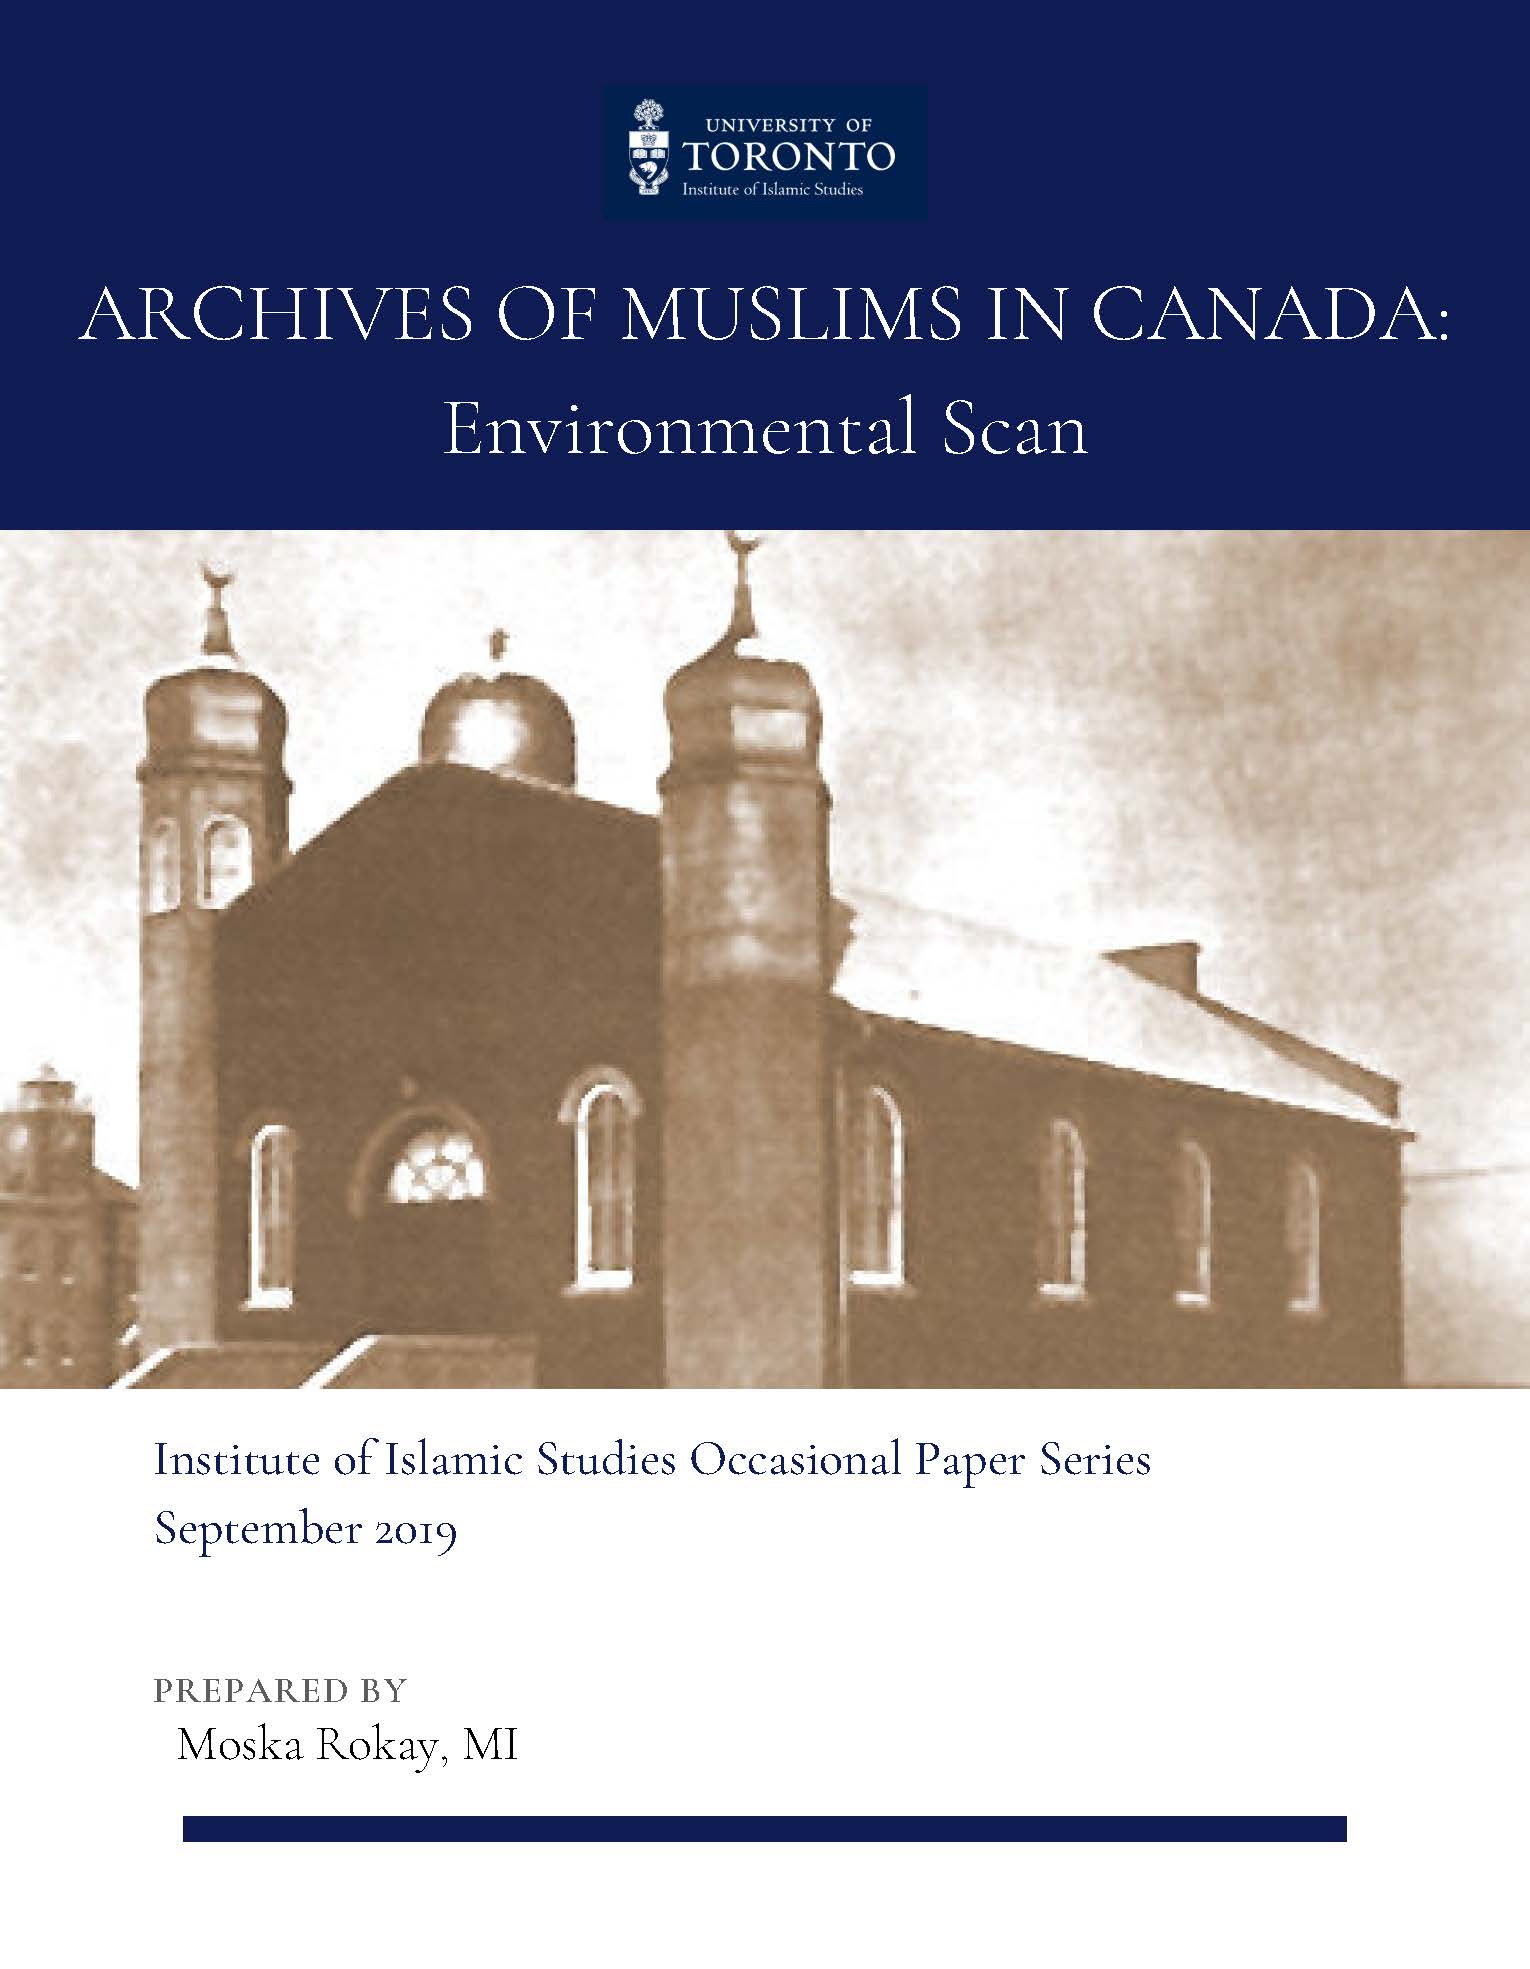 Archives of Muslims in Canada: Environmental Scan